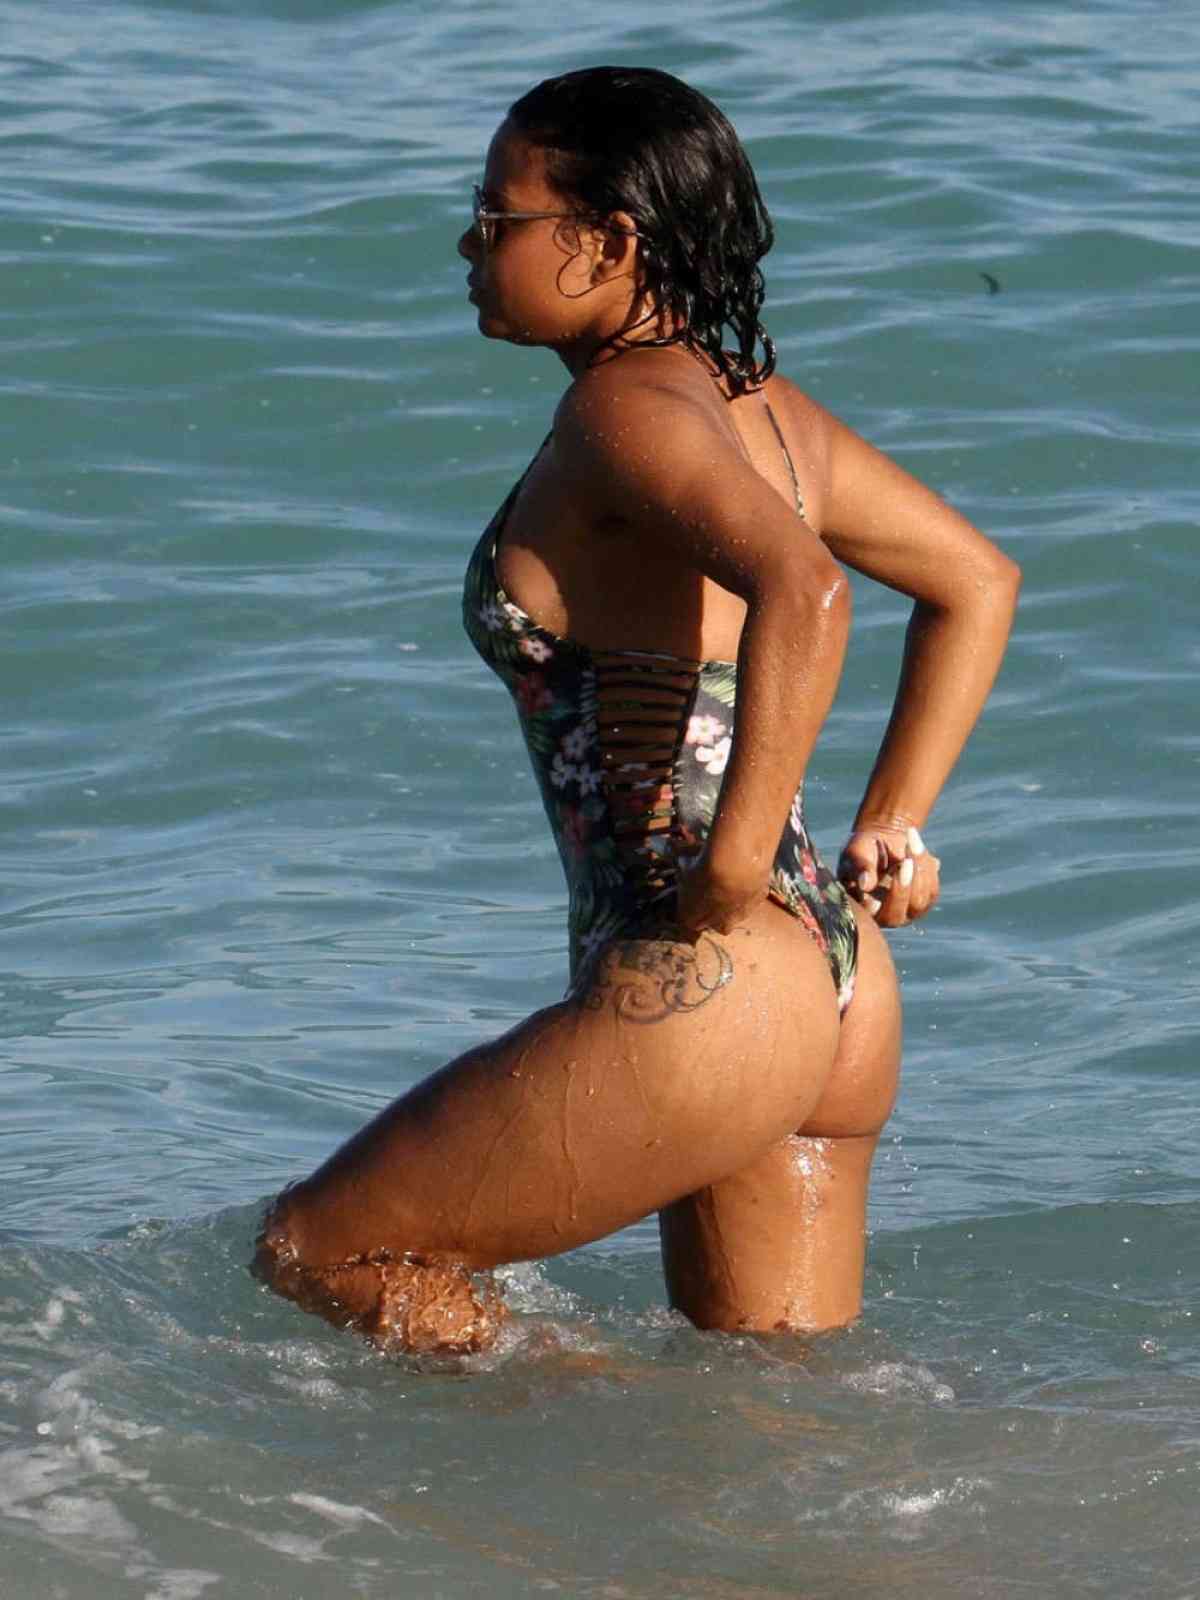 Christina Milian Pictures. Hotness Rating = Unrated